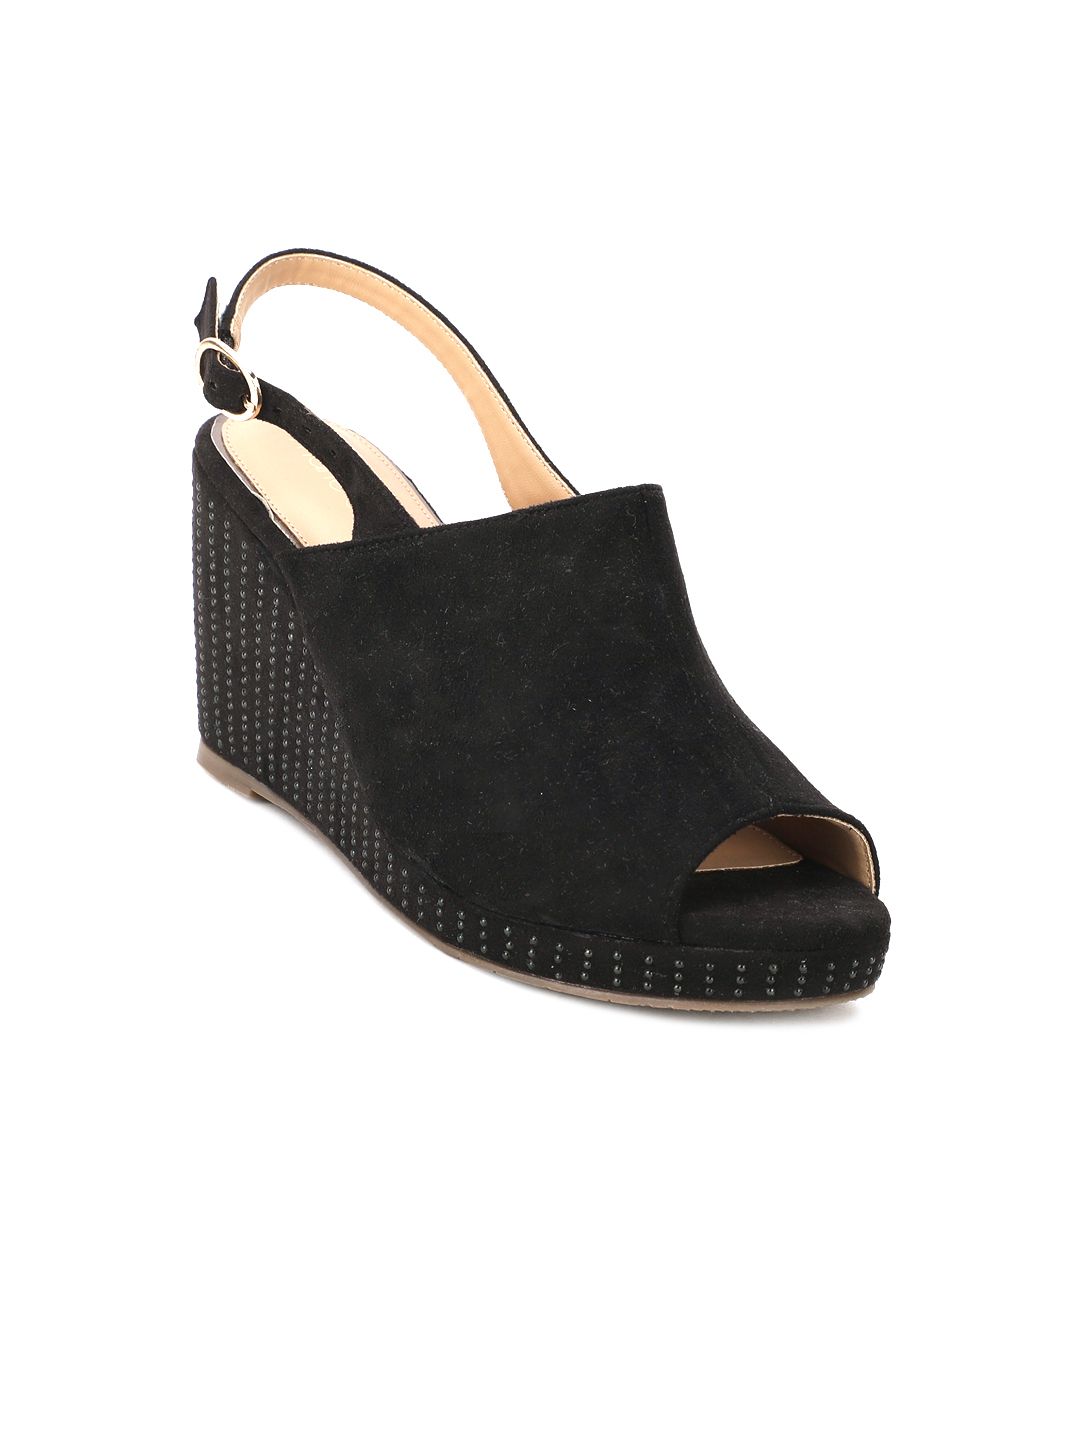 Marie Claire Women Black PU Wedge Peep Toes Price in India